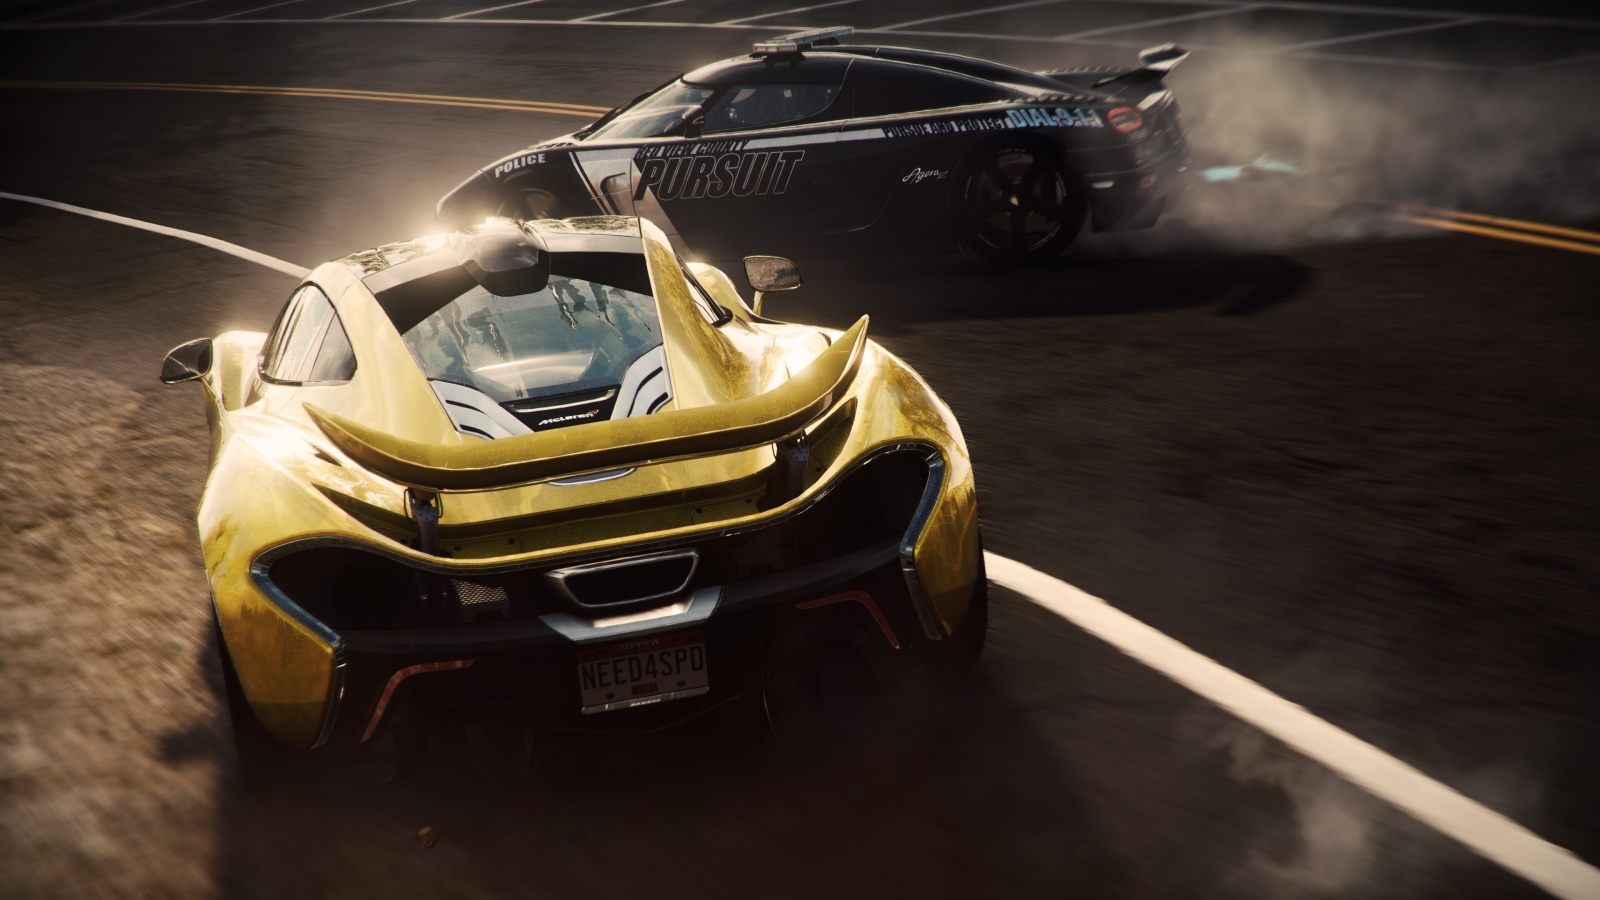 need For speed rivals Nfs rivals need For speed mclaren P1 koenigsegg 97642 3840x2160